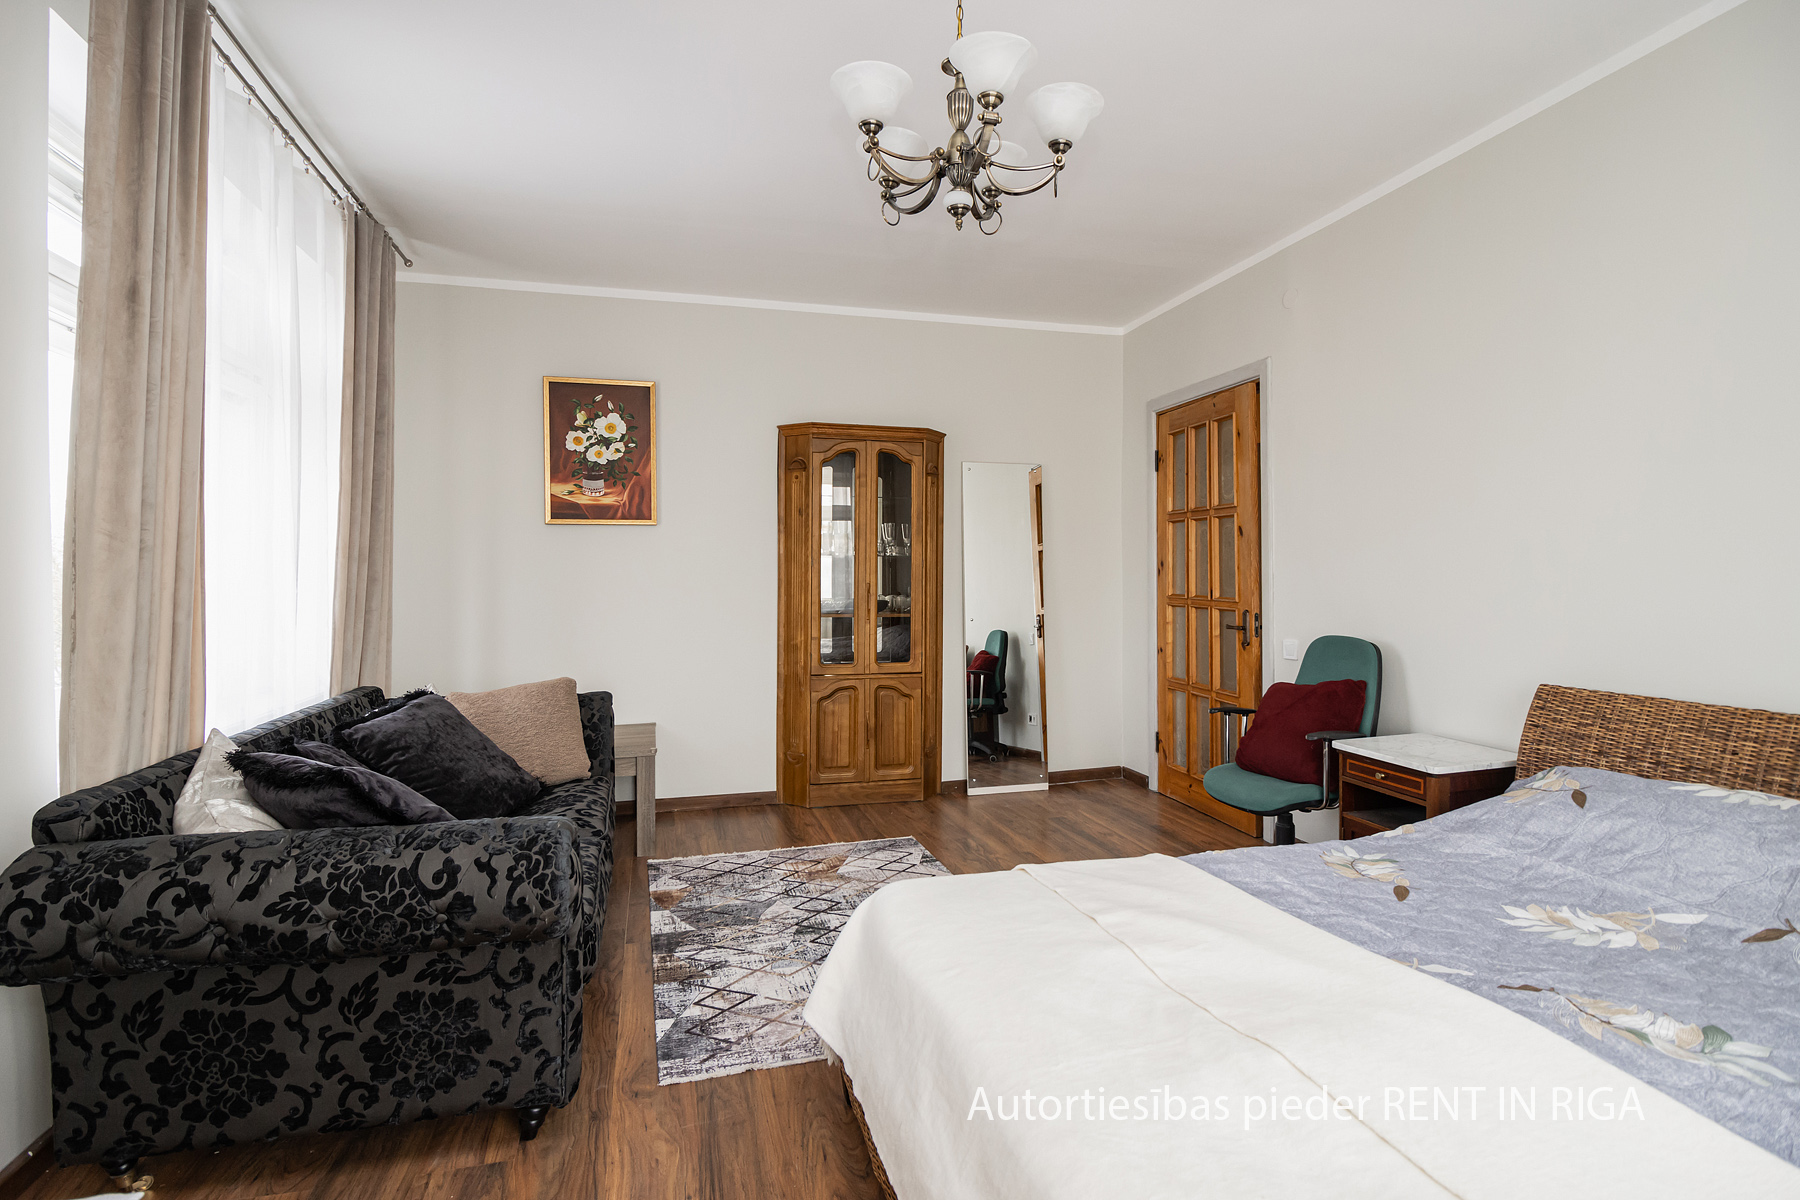 Apartment for rent, Citadeles street 5 - Image 1